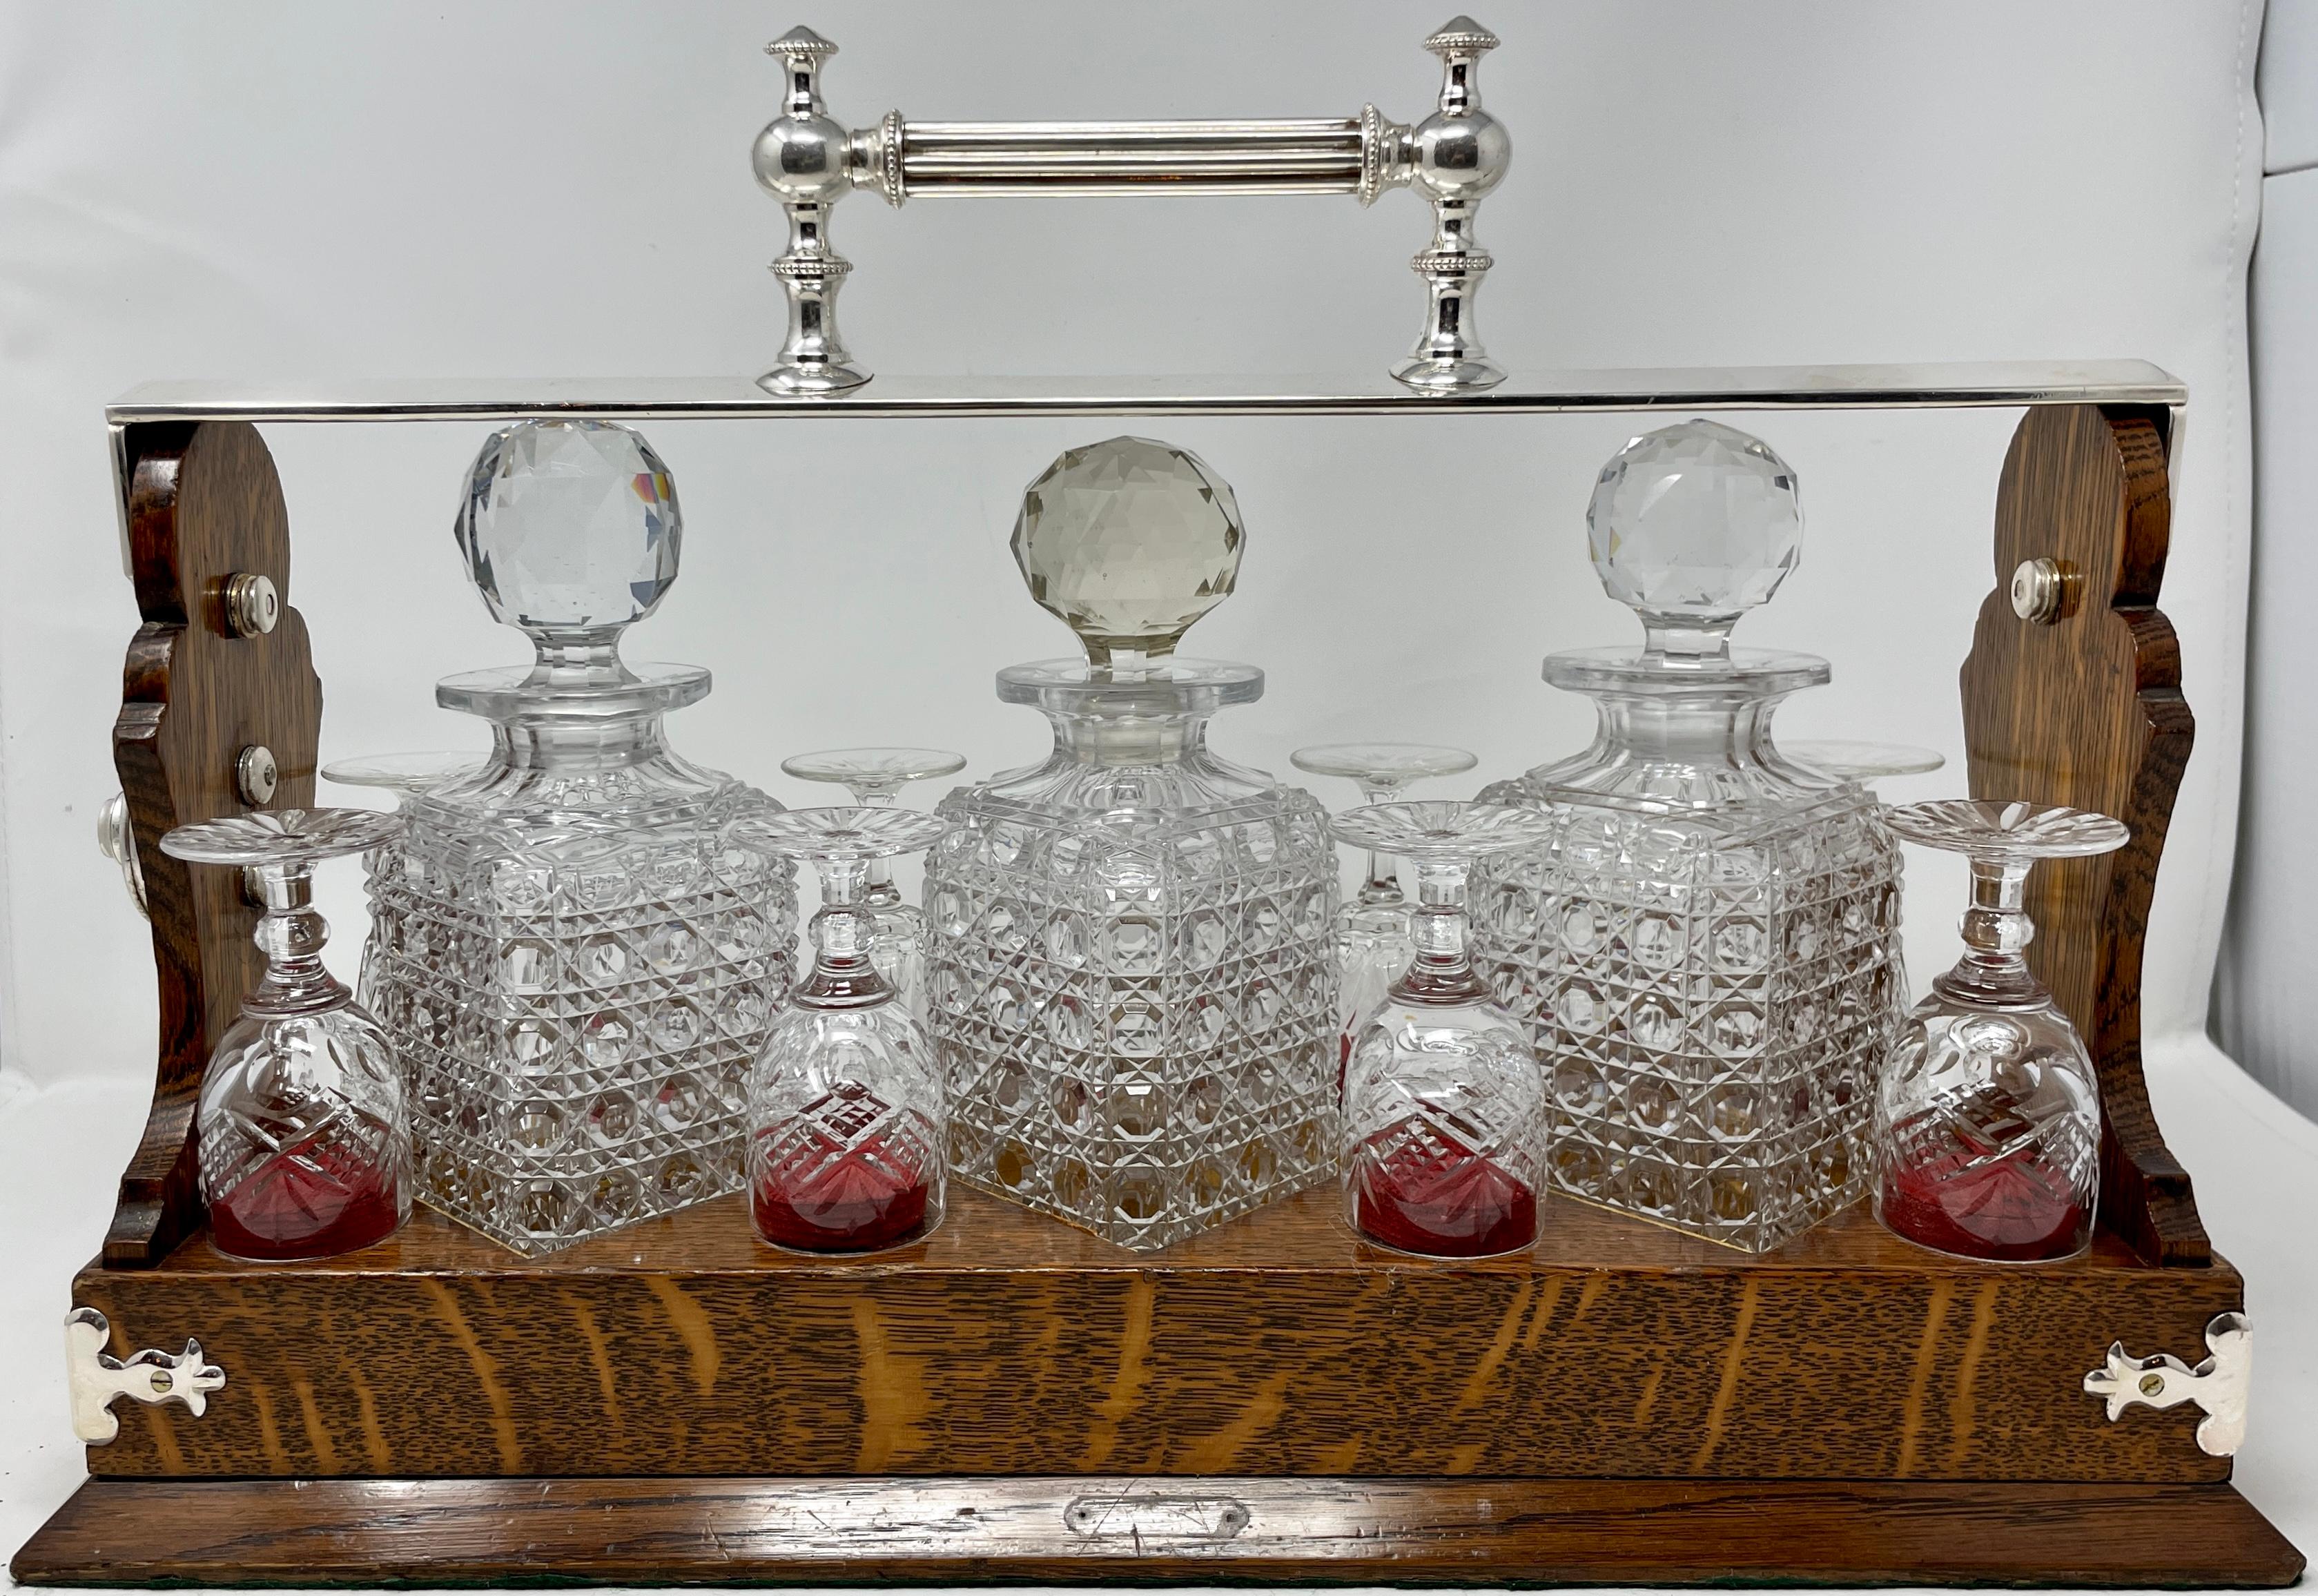 Antique English cut crystal tantalus, circa 1880. Made by Betjemanns & Sons in London.